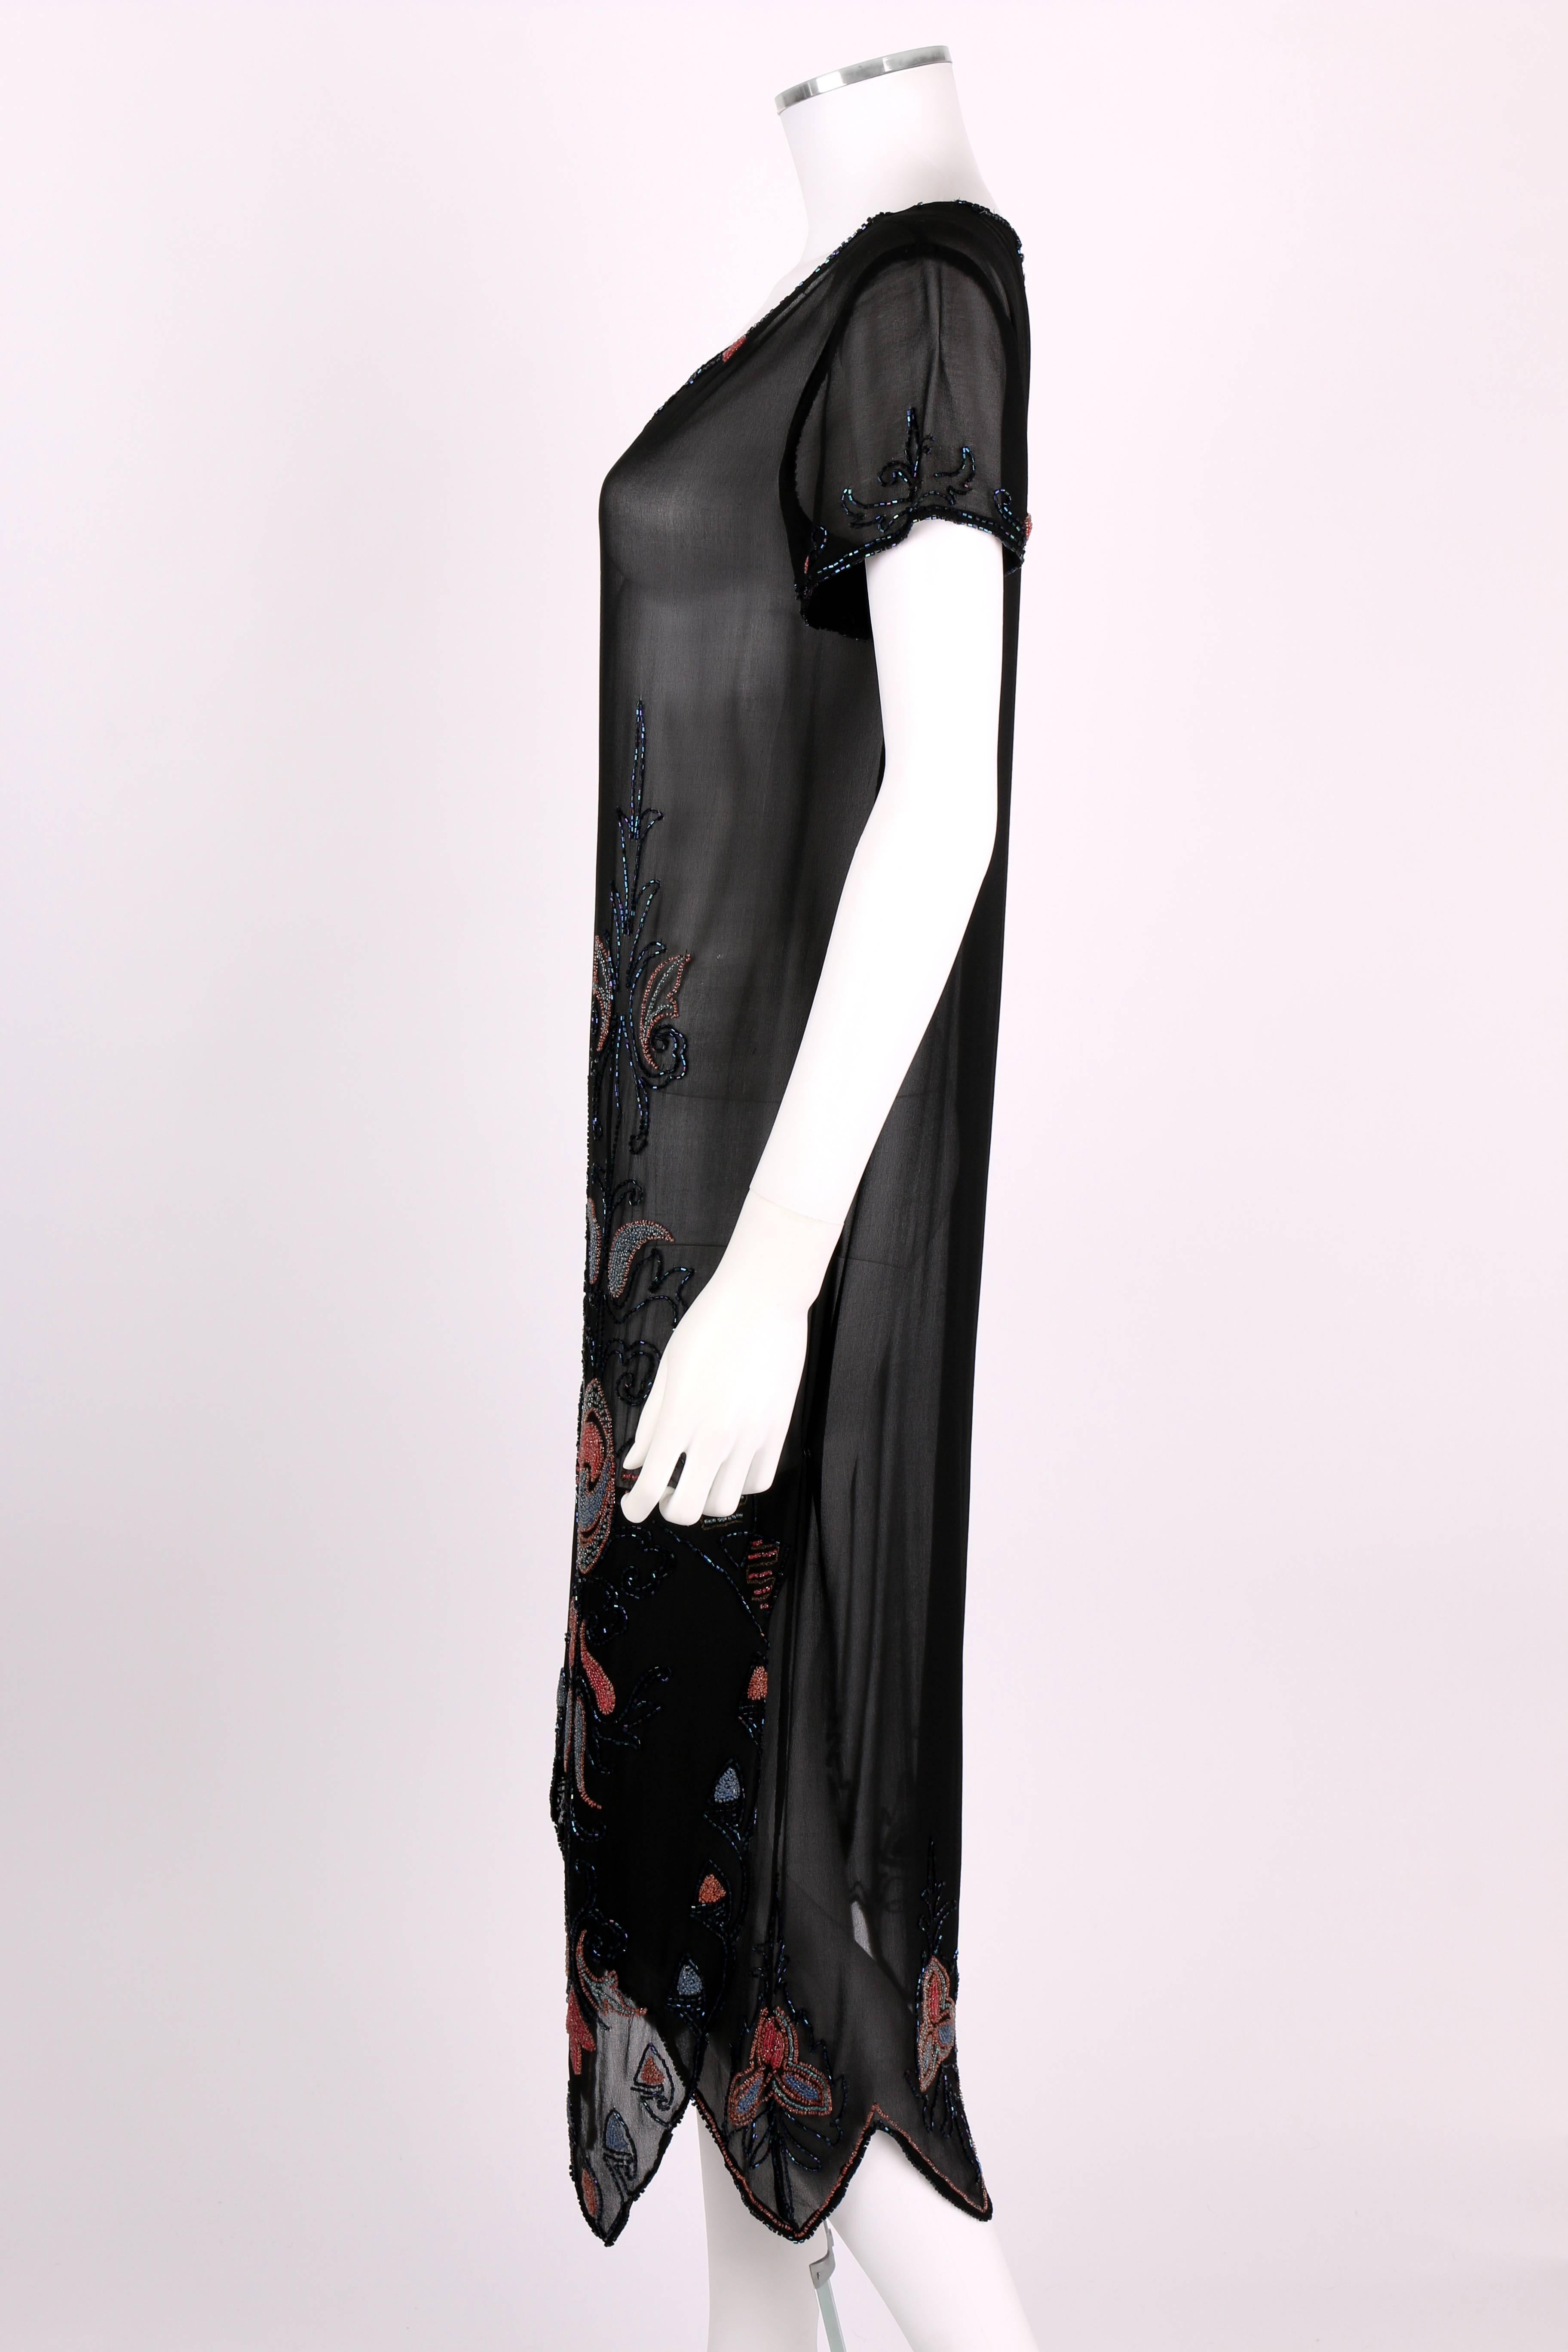 COUTURE c.1920's Black Silk Georgette Floral Glass Beaded Flapper Evening Dress For Sale 1